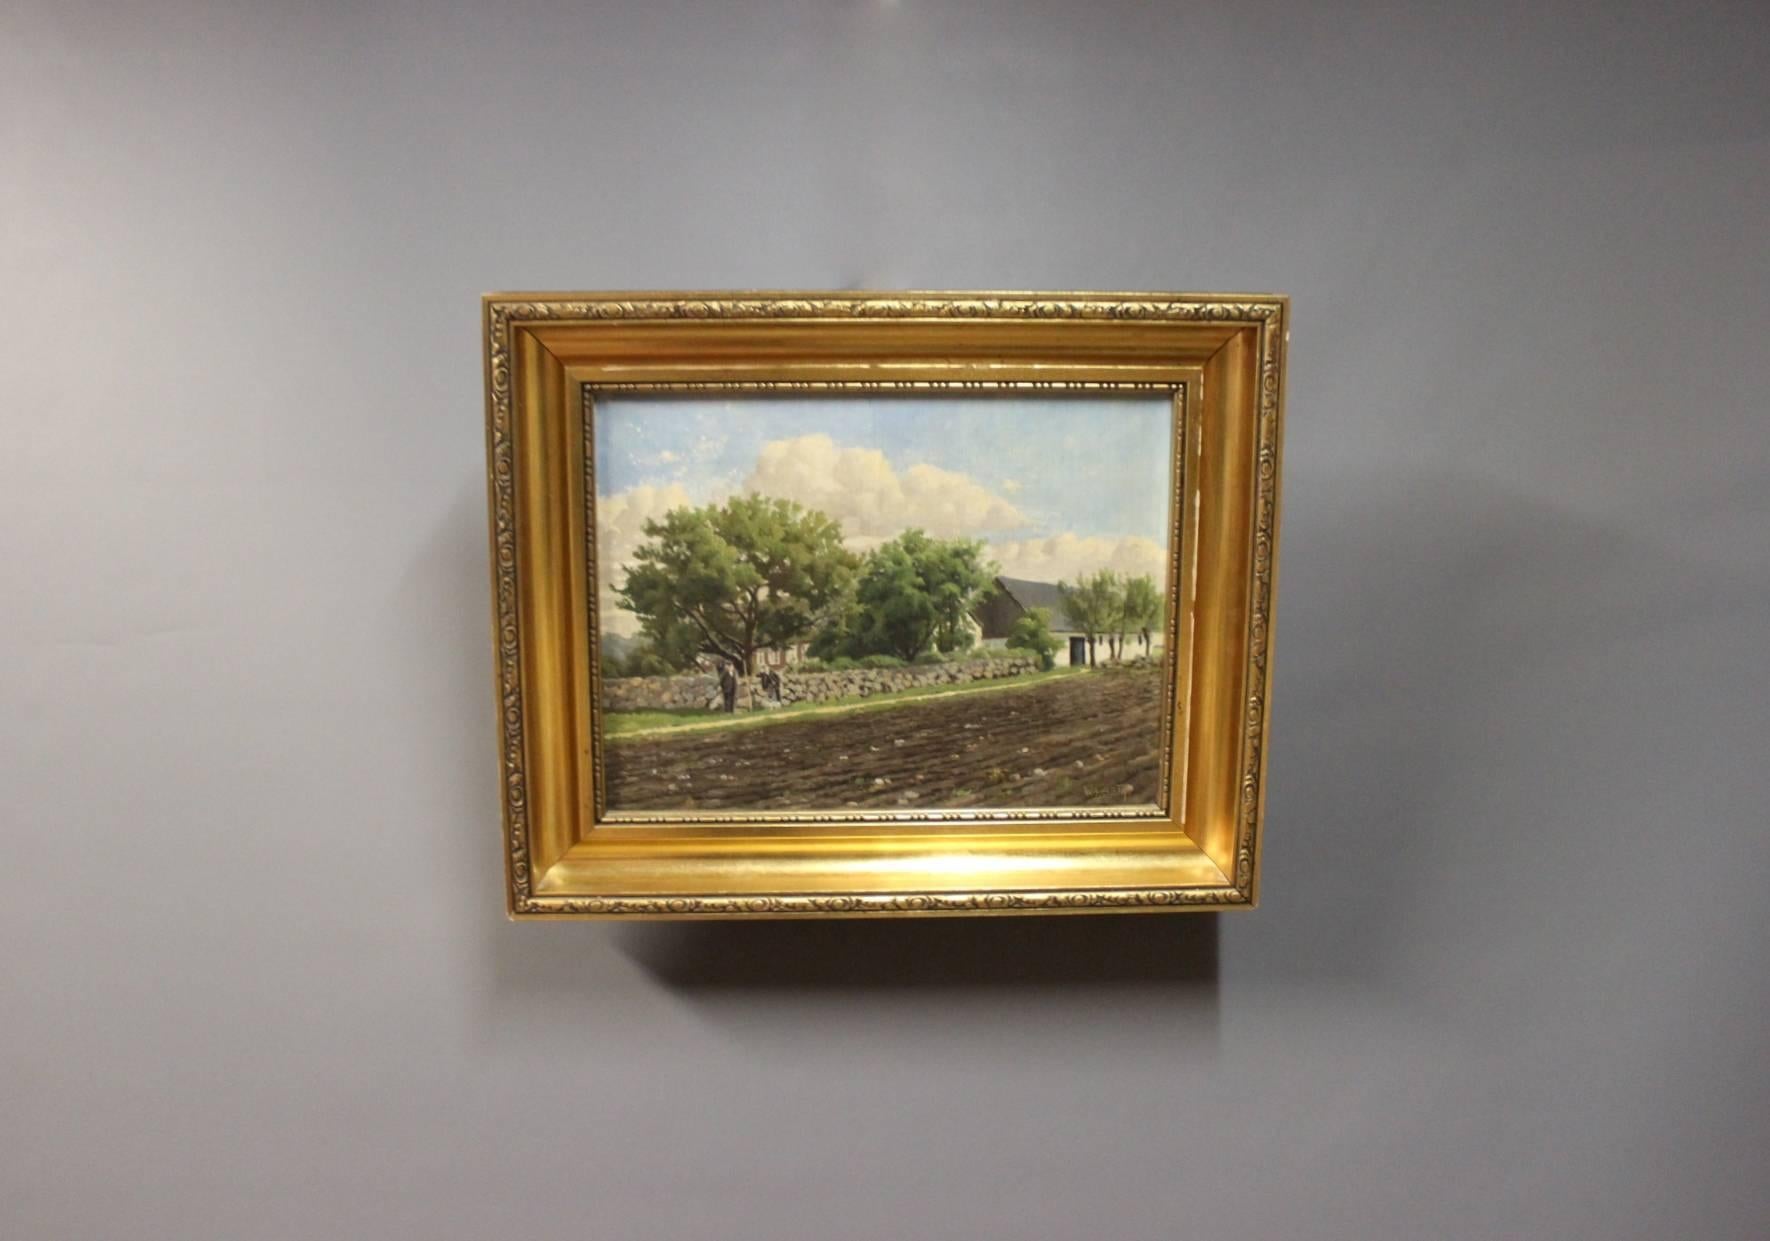 This oil painting on canvas captures the serene beauty of Denmark's countryside, showcasing the talent of the artist Niels Walseth (1914-2001). Known for his captivating landscapes, Walseth's signature on the painting adds authenticity and value to